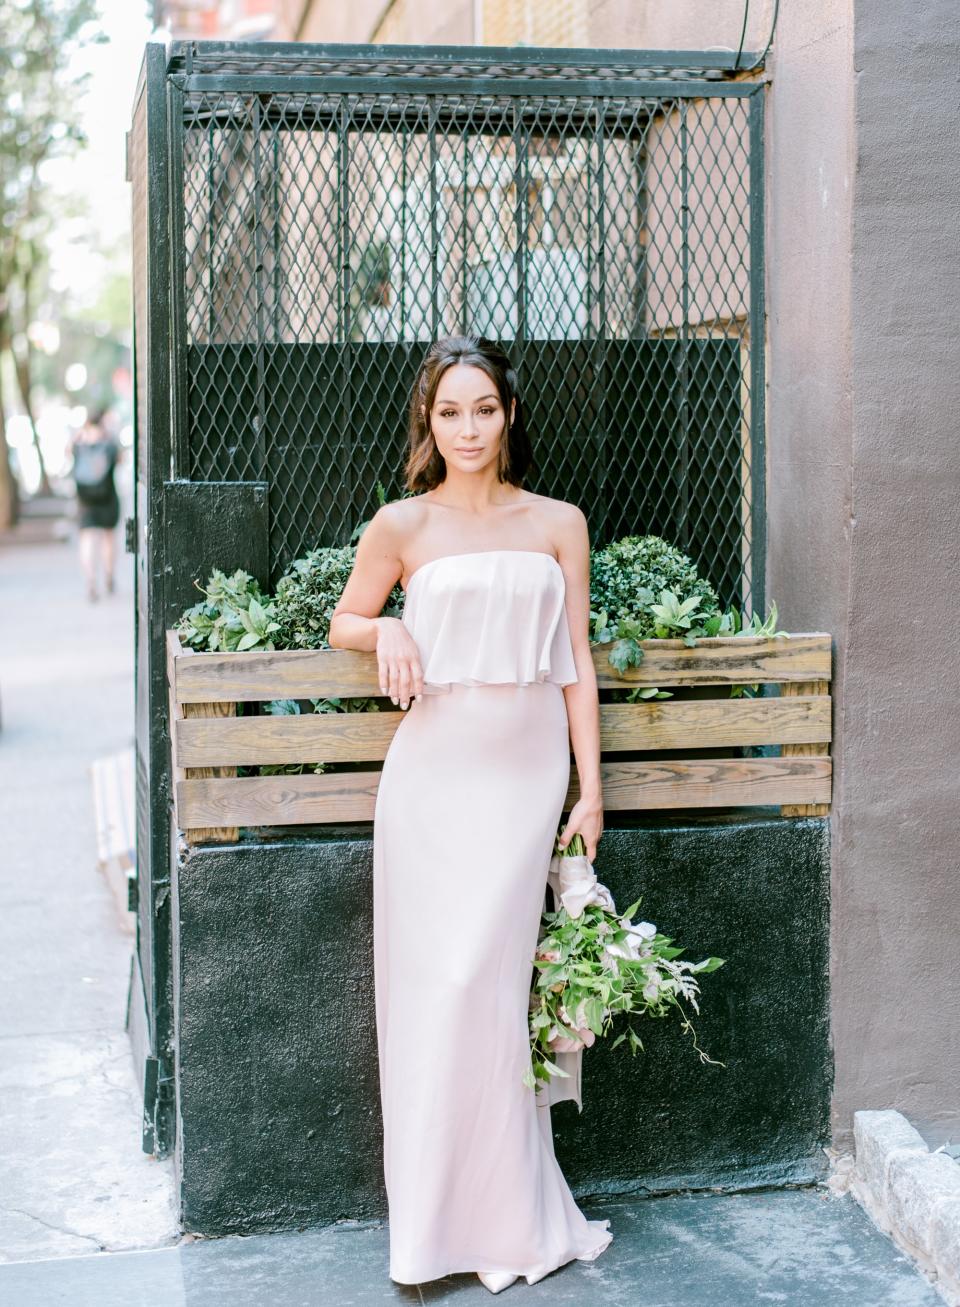 On the market for a bridesmaid dress? Check this one out!Every bridesmaid's worst nightmare is having to wear a frumpy, unflattering dress. These days, bridesmaid wear is generally more stylish than in decades...